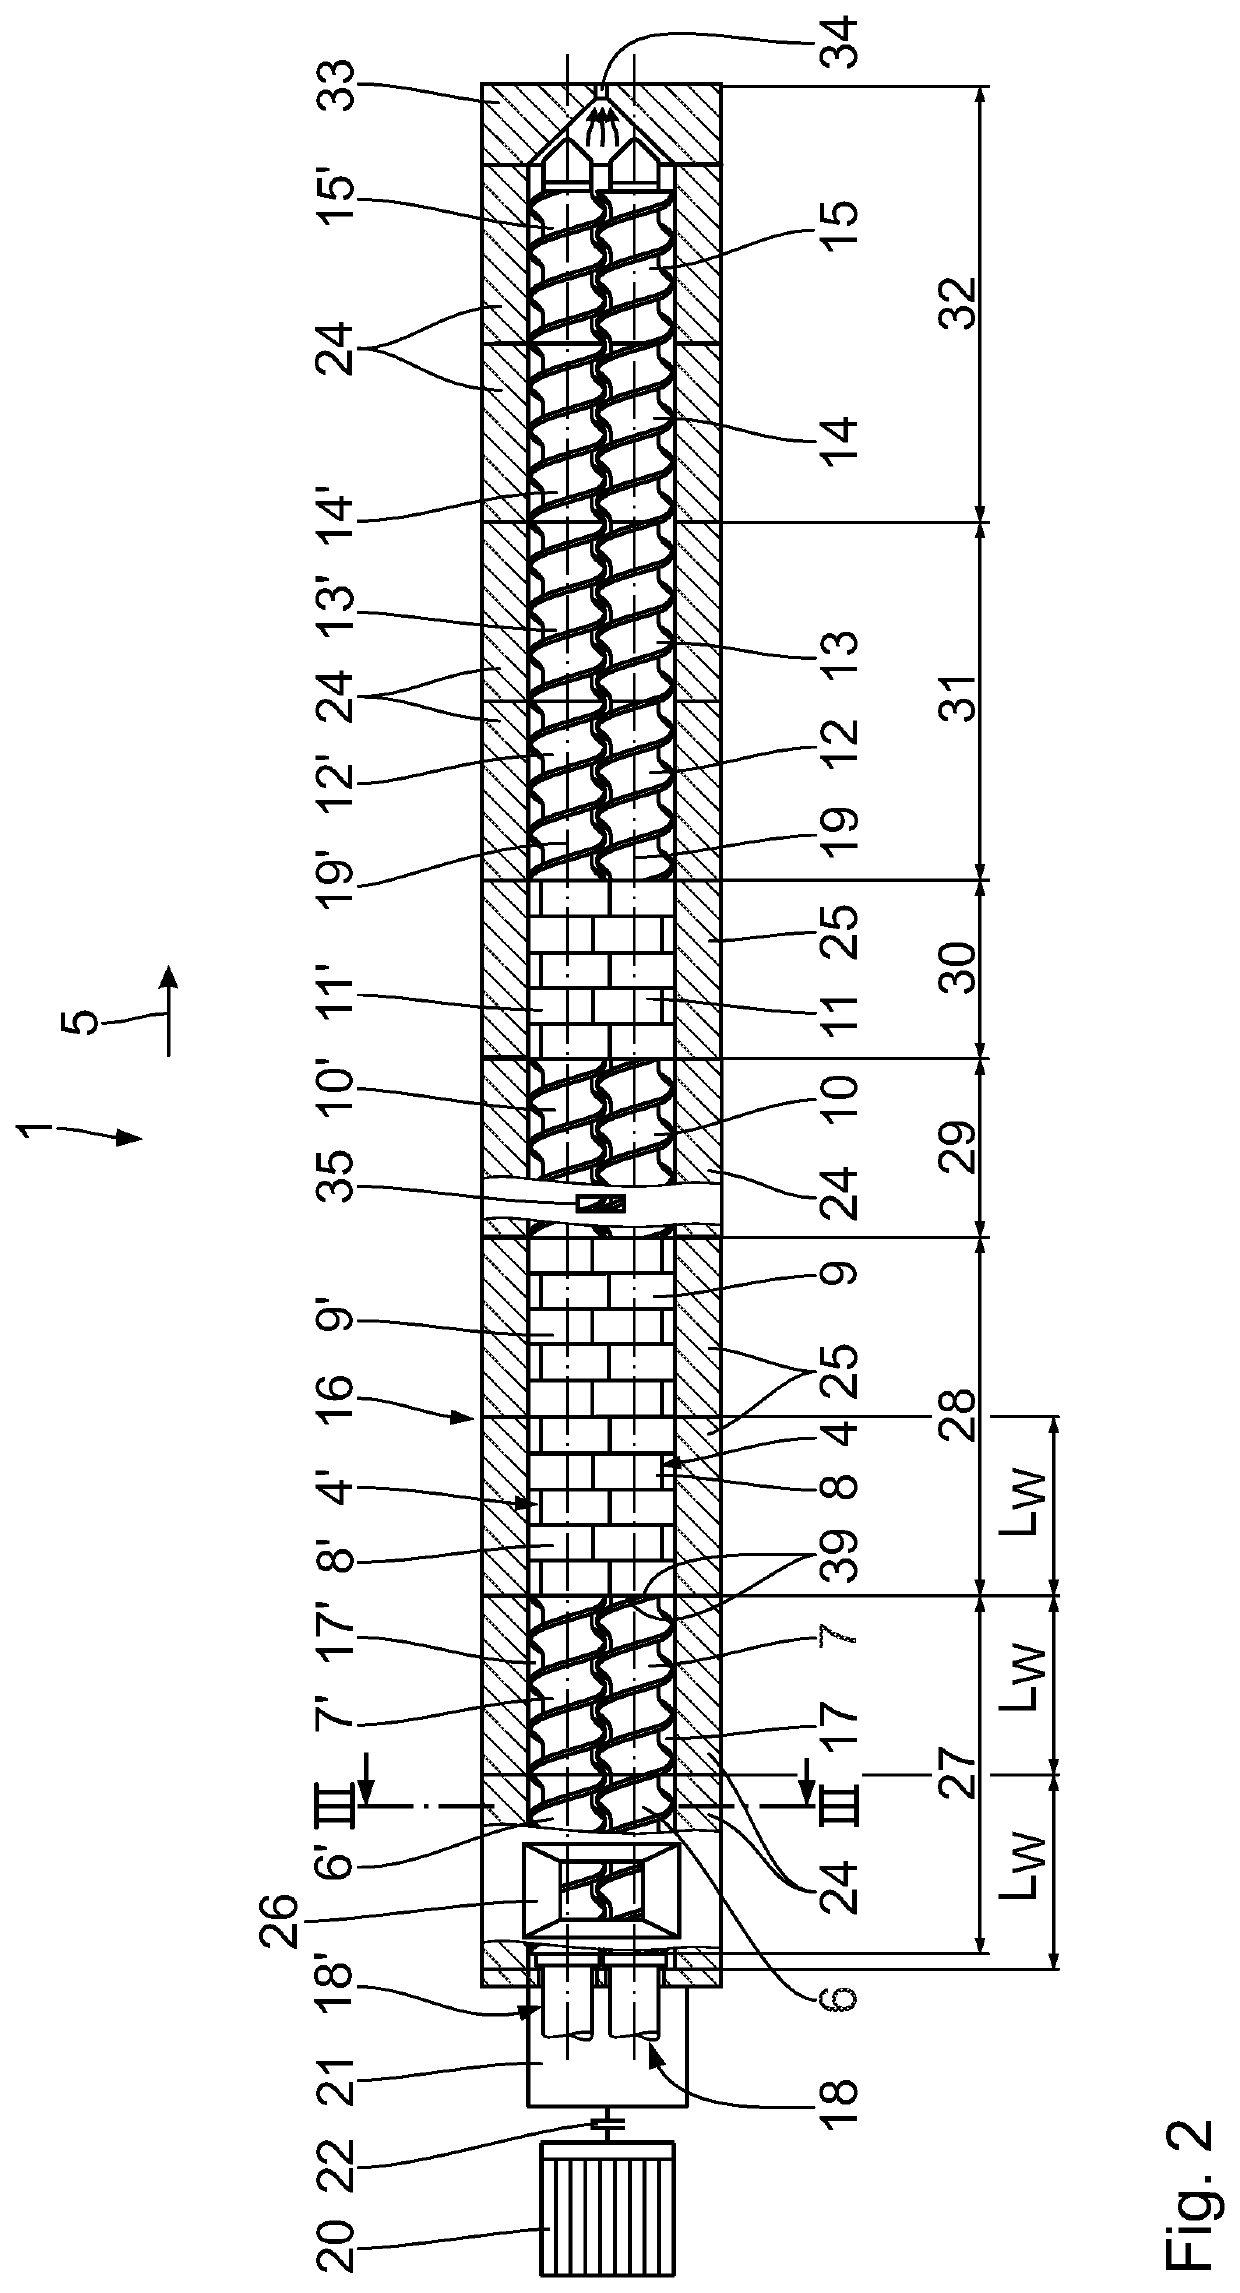 Treatment element for a treatment element shaft of a screw machine, and method for producing a treatment element